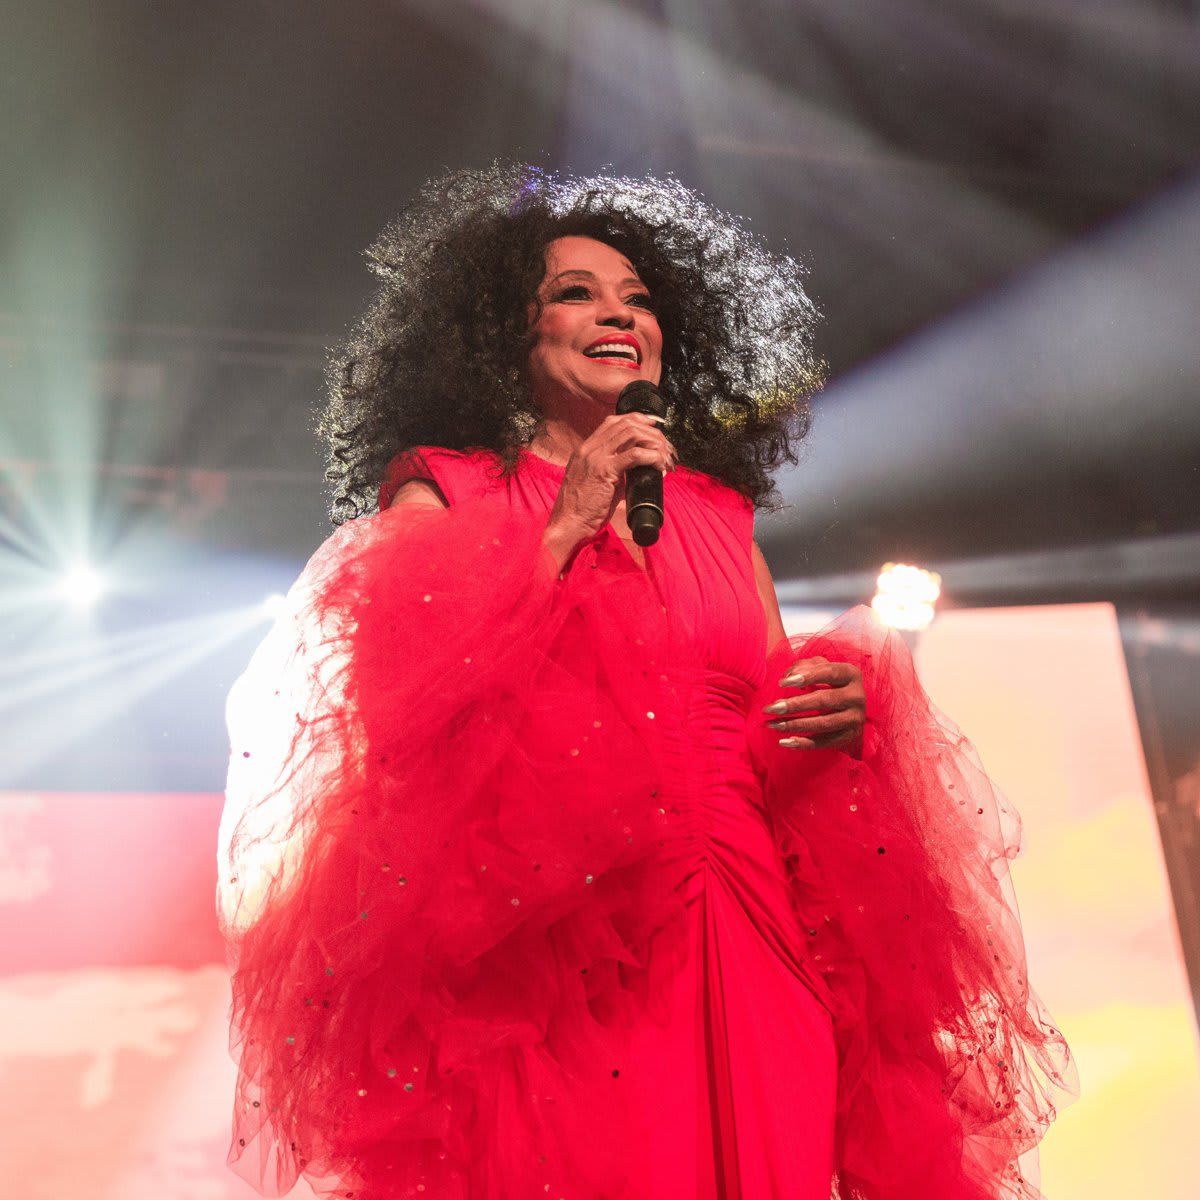 AHF's Dallas 2019 World AIDS Day Concert Starring Diana Ross